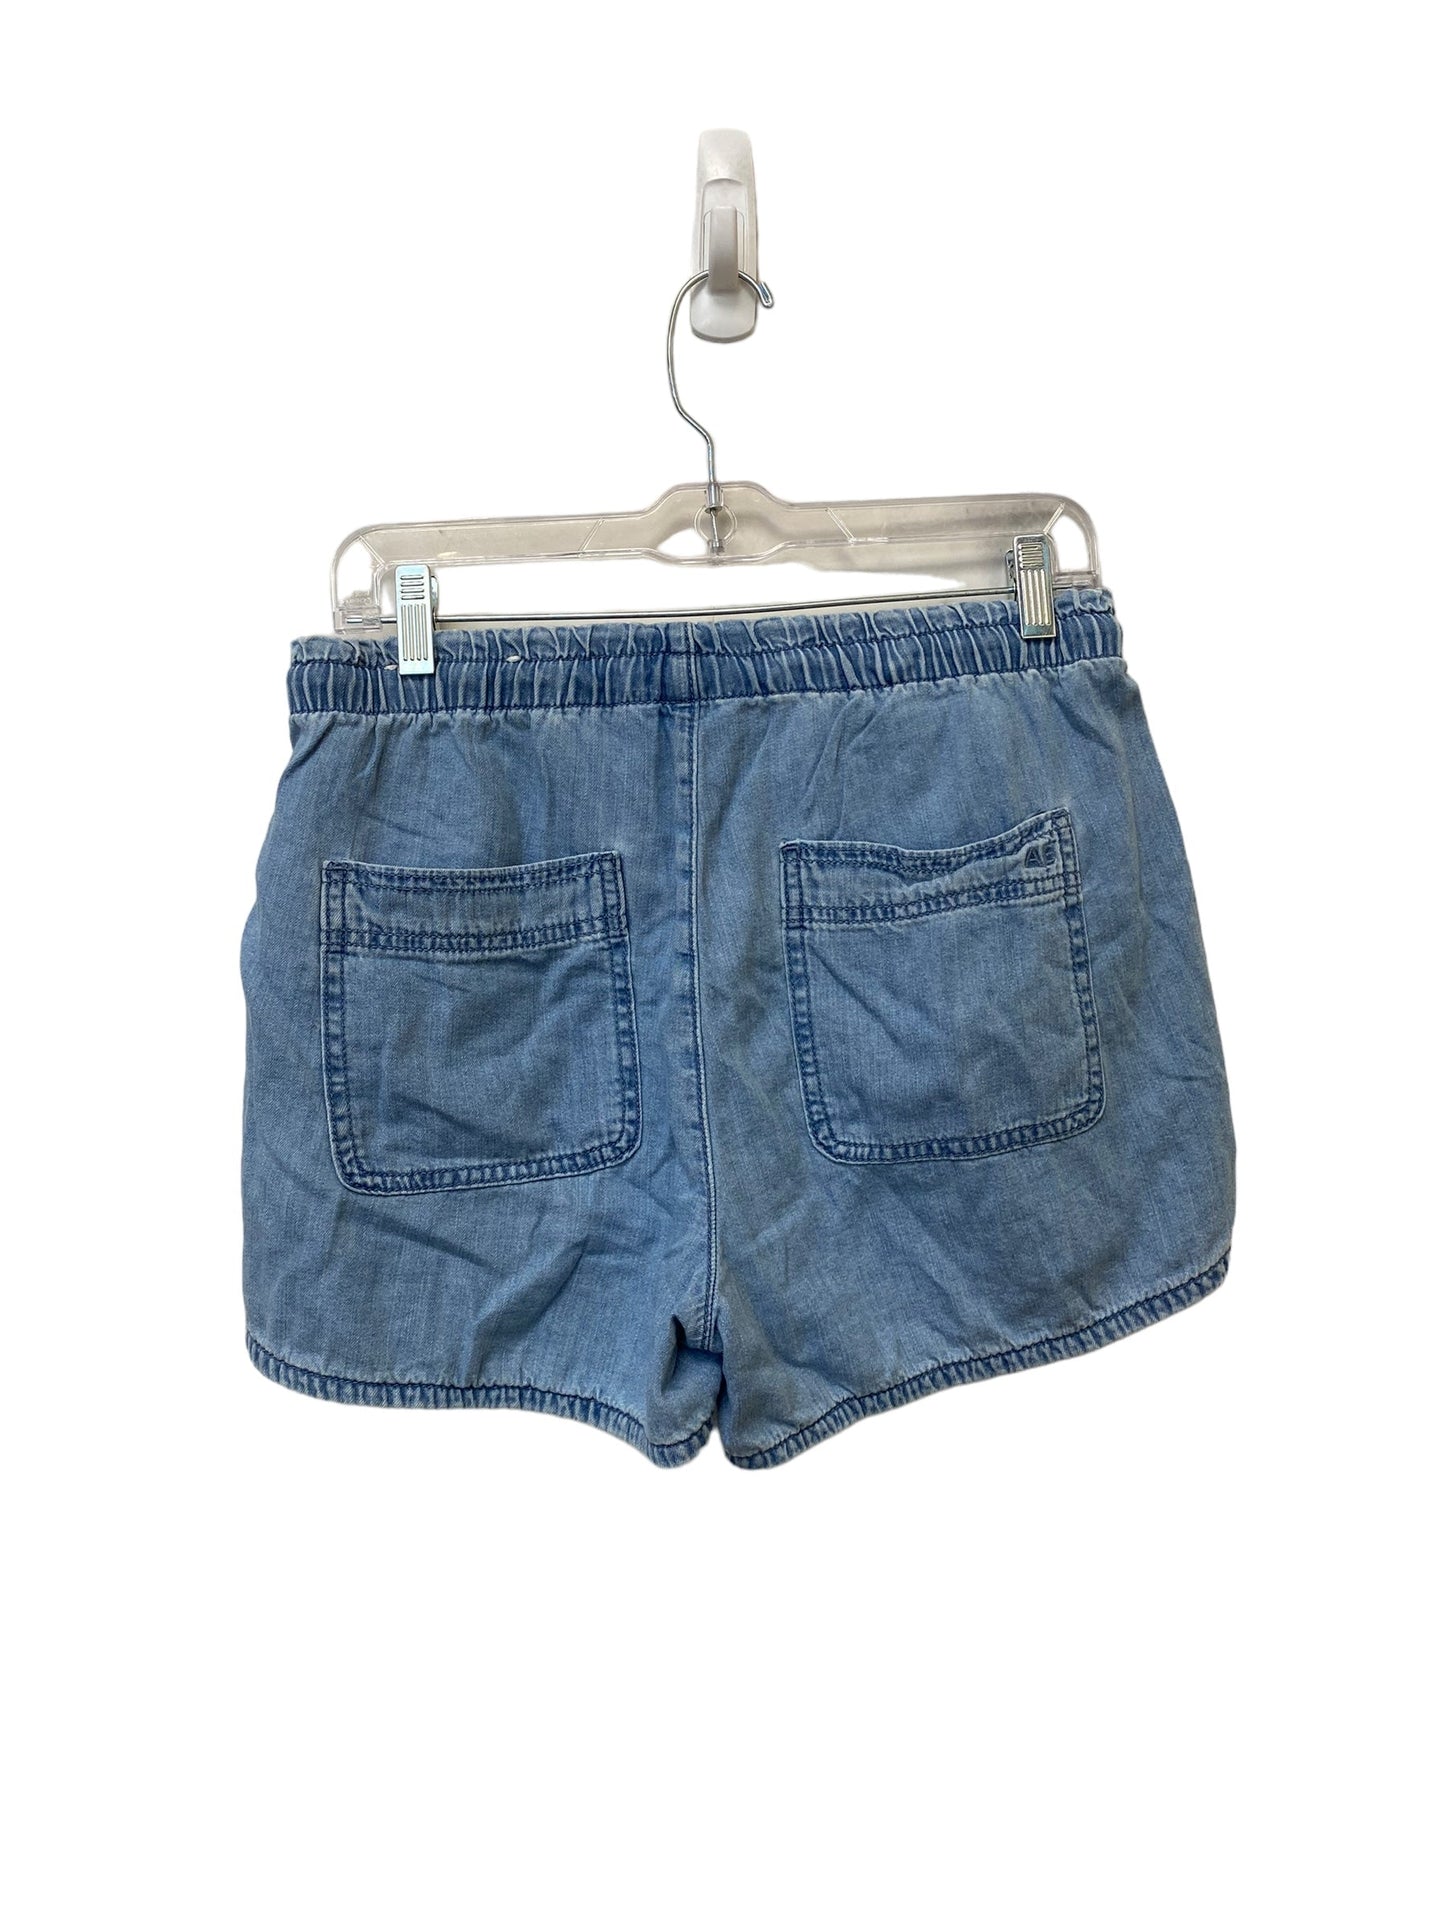 Blue Shorts American Eagle, Size S